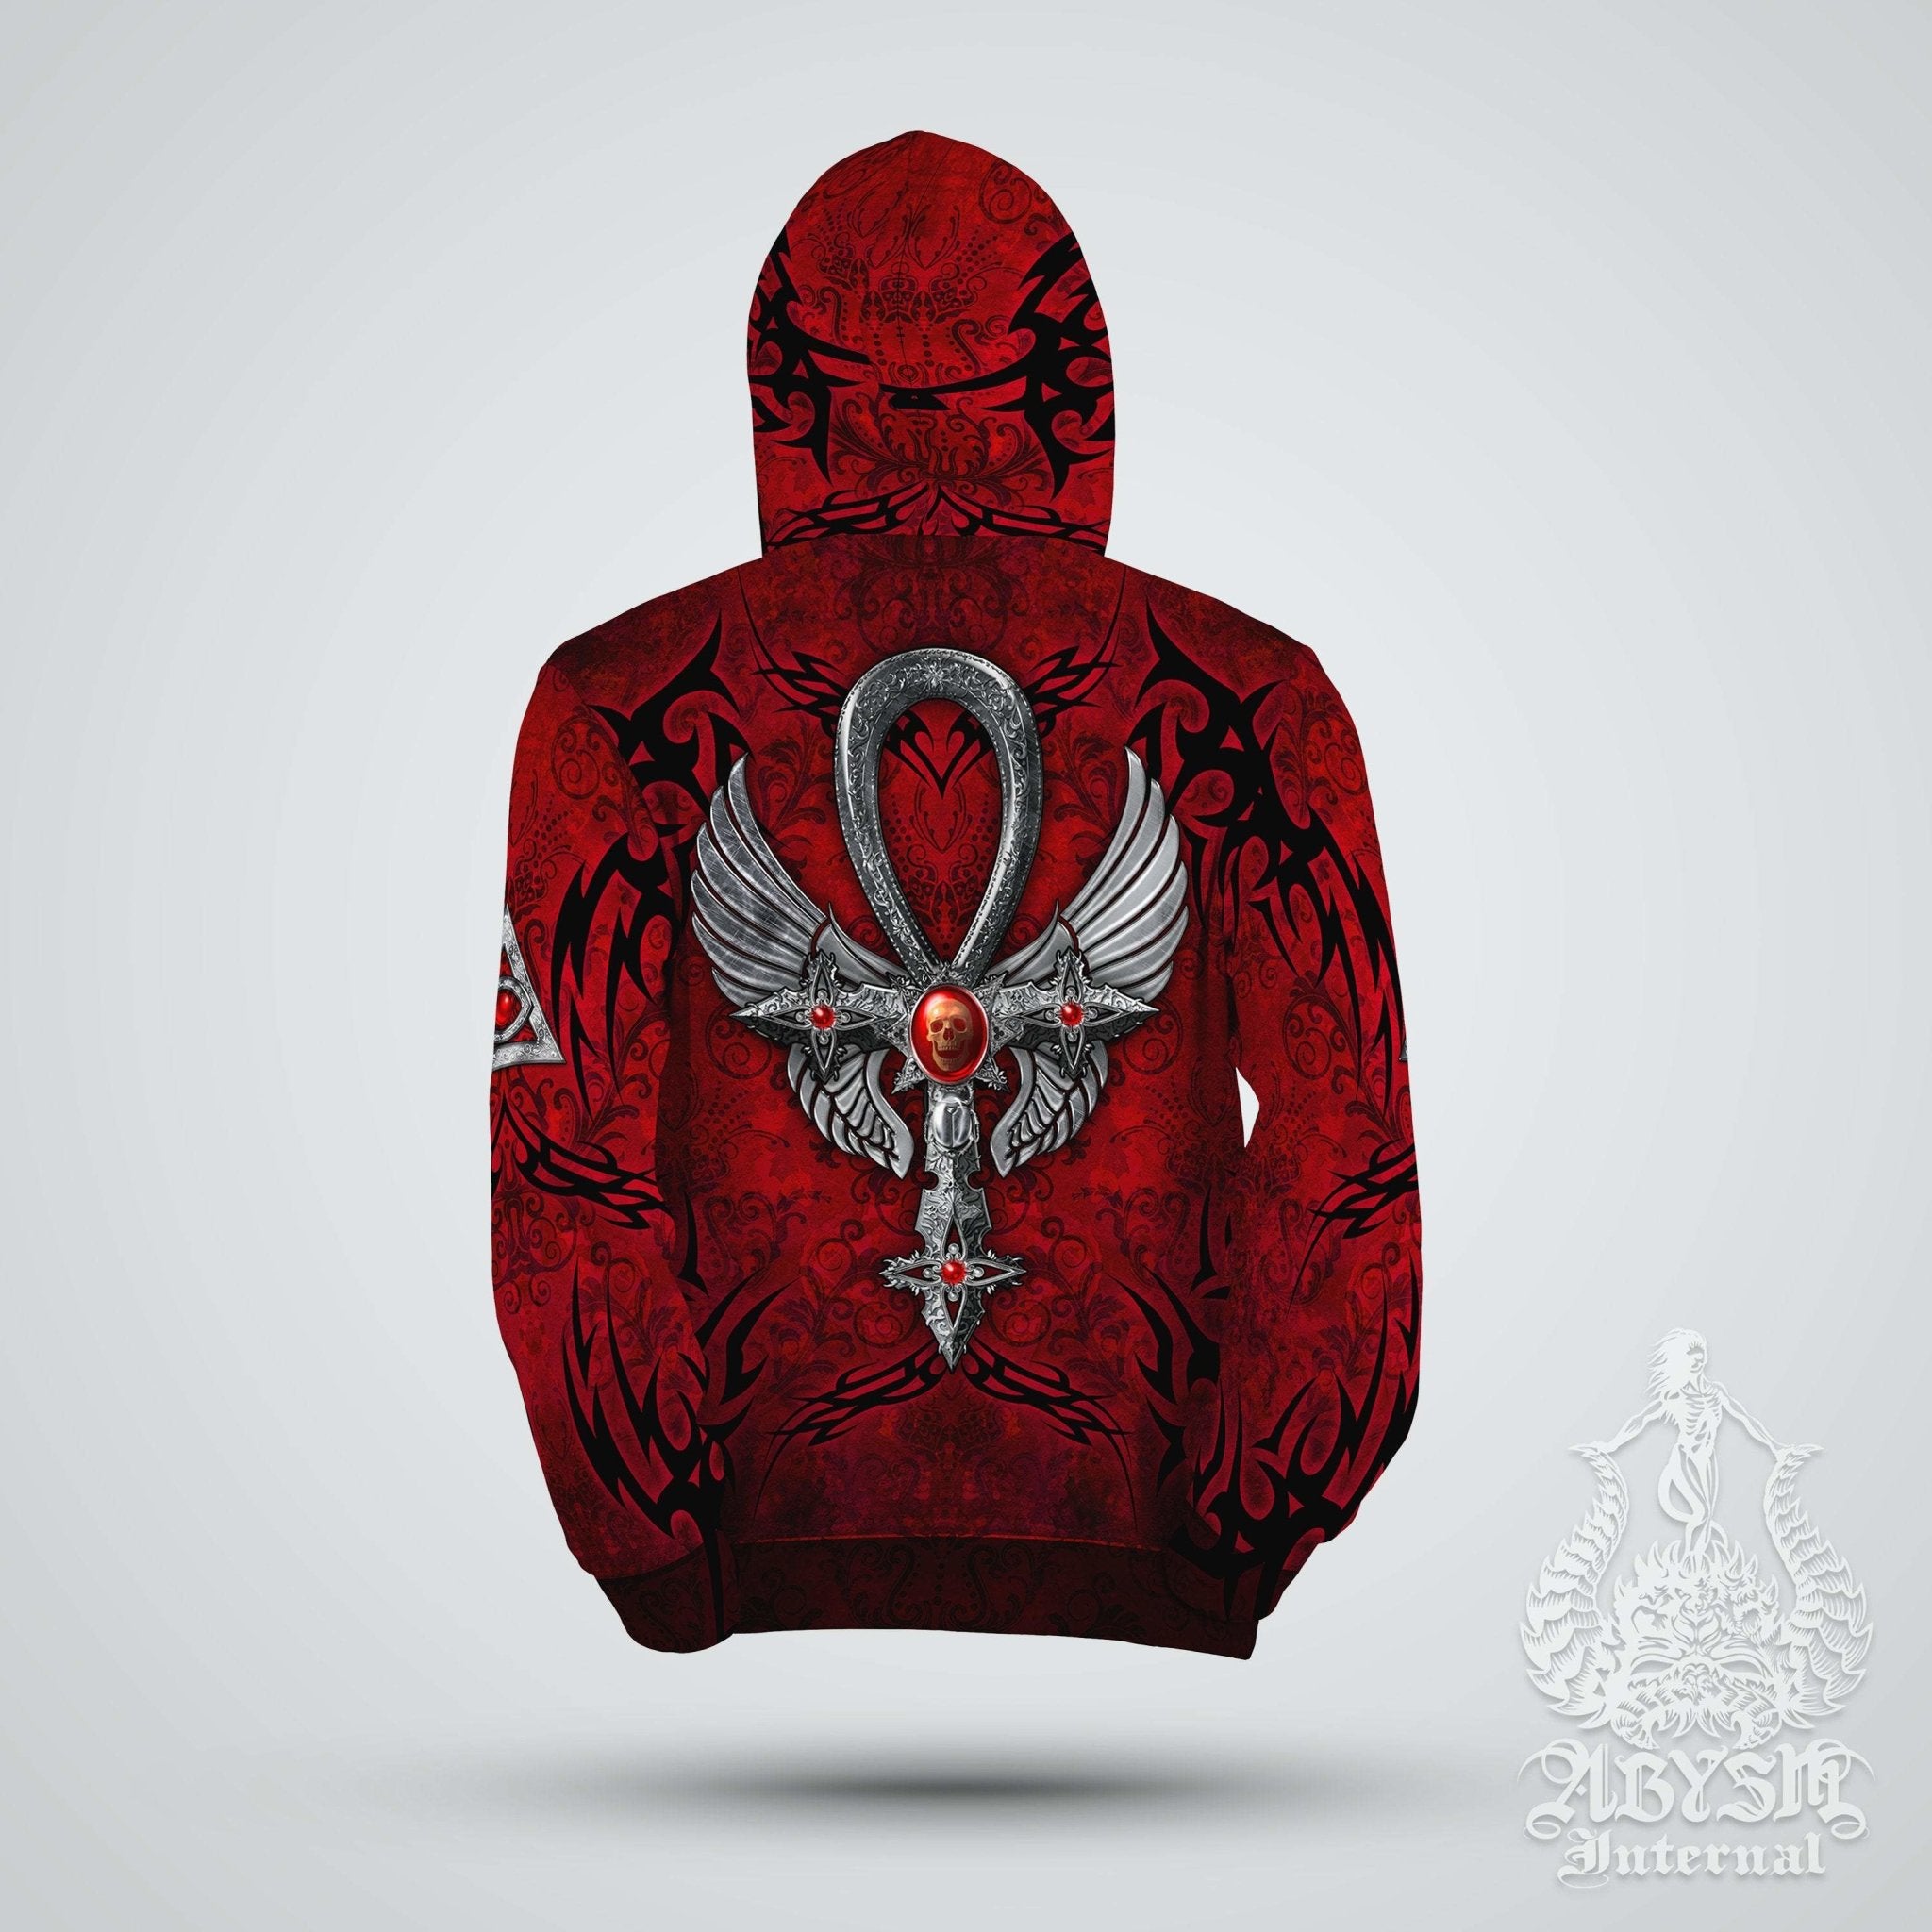 Occult Hoodie, Gothic Streetwear, Street Outfit, Goth, Alternative Clothing, Unisex - Ankh Cross, Silver Red - Abysm Internal